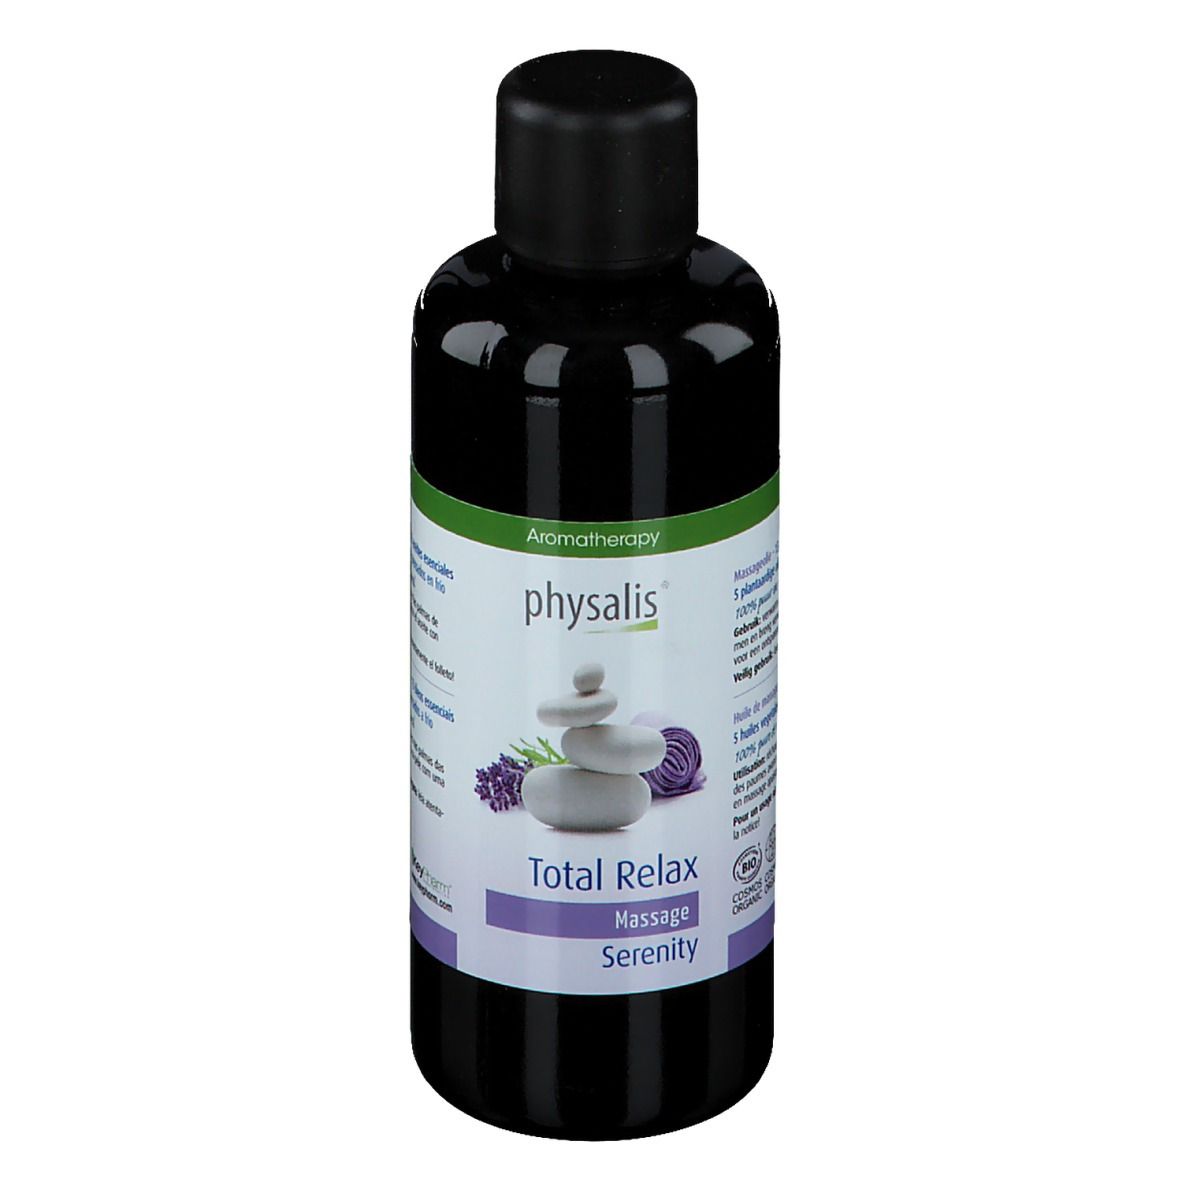 physalis® Total Relax Massage Serenity